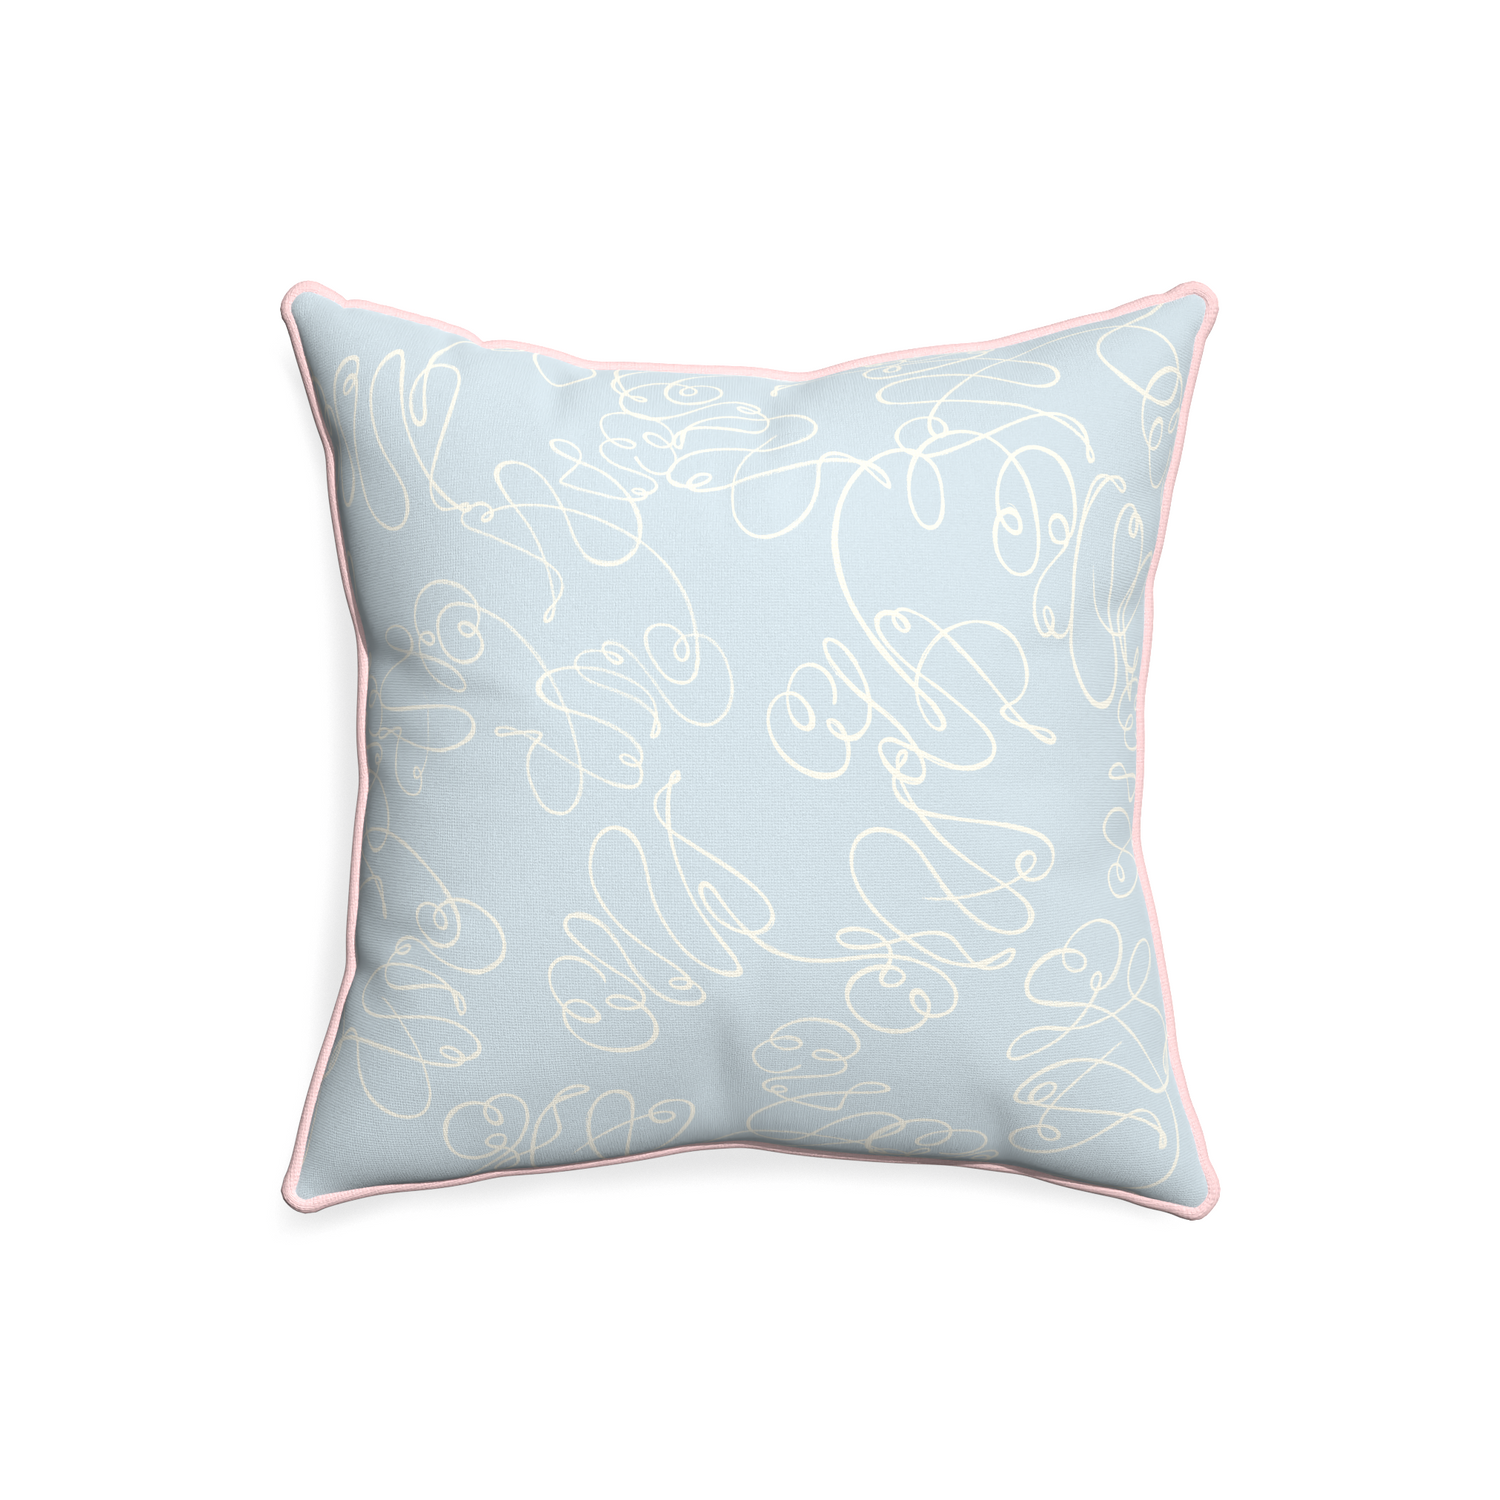 20-square mirabella custom pillow with petal piping on white background